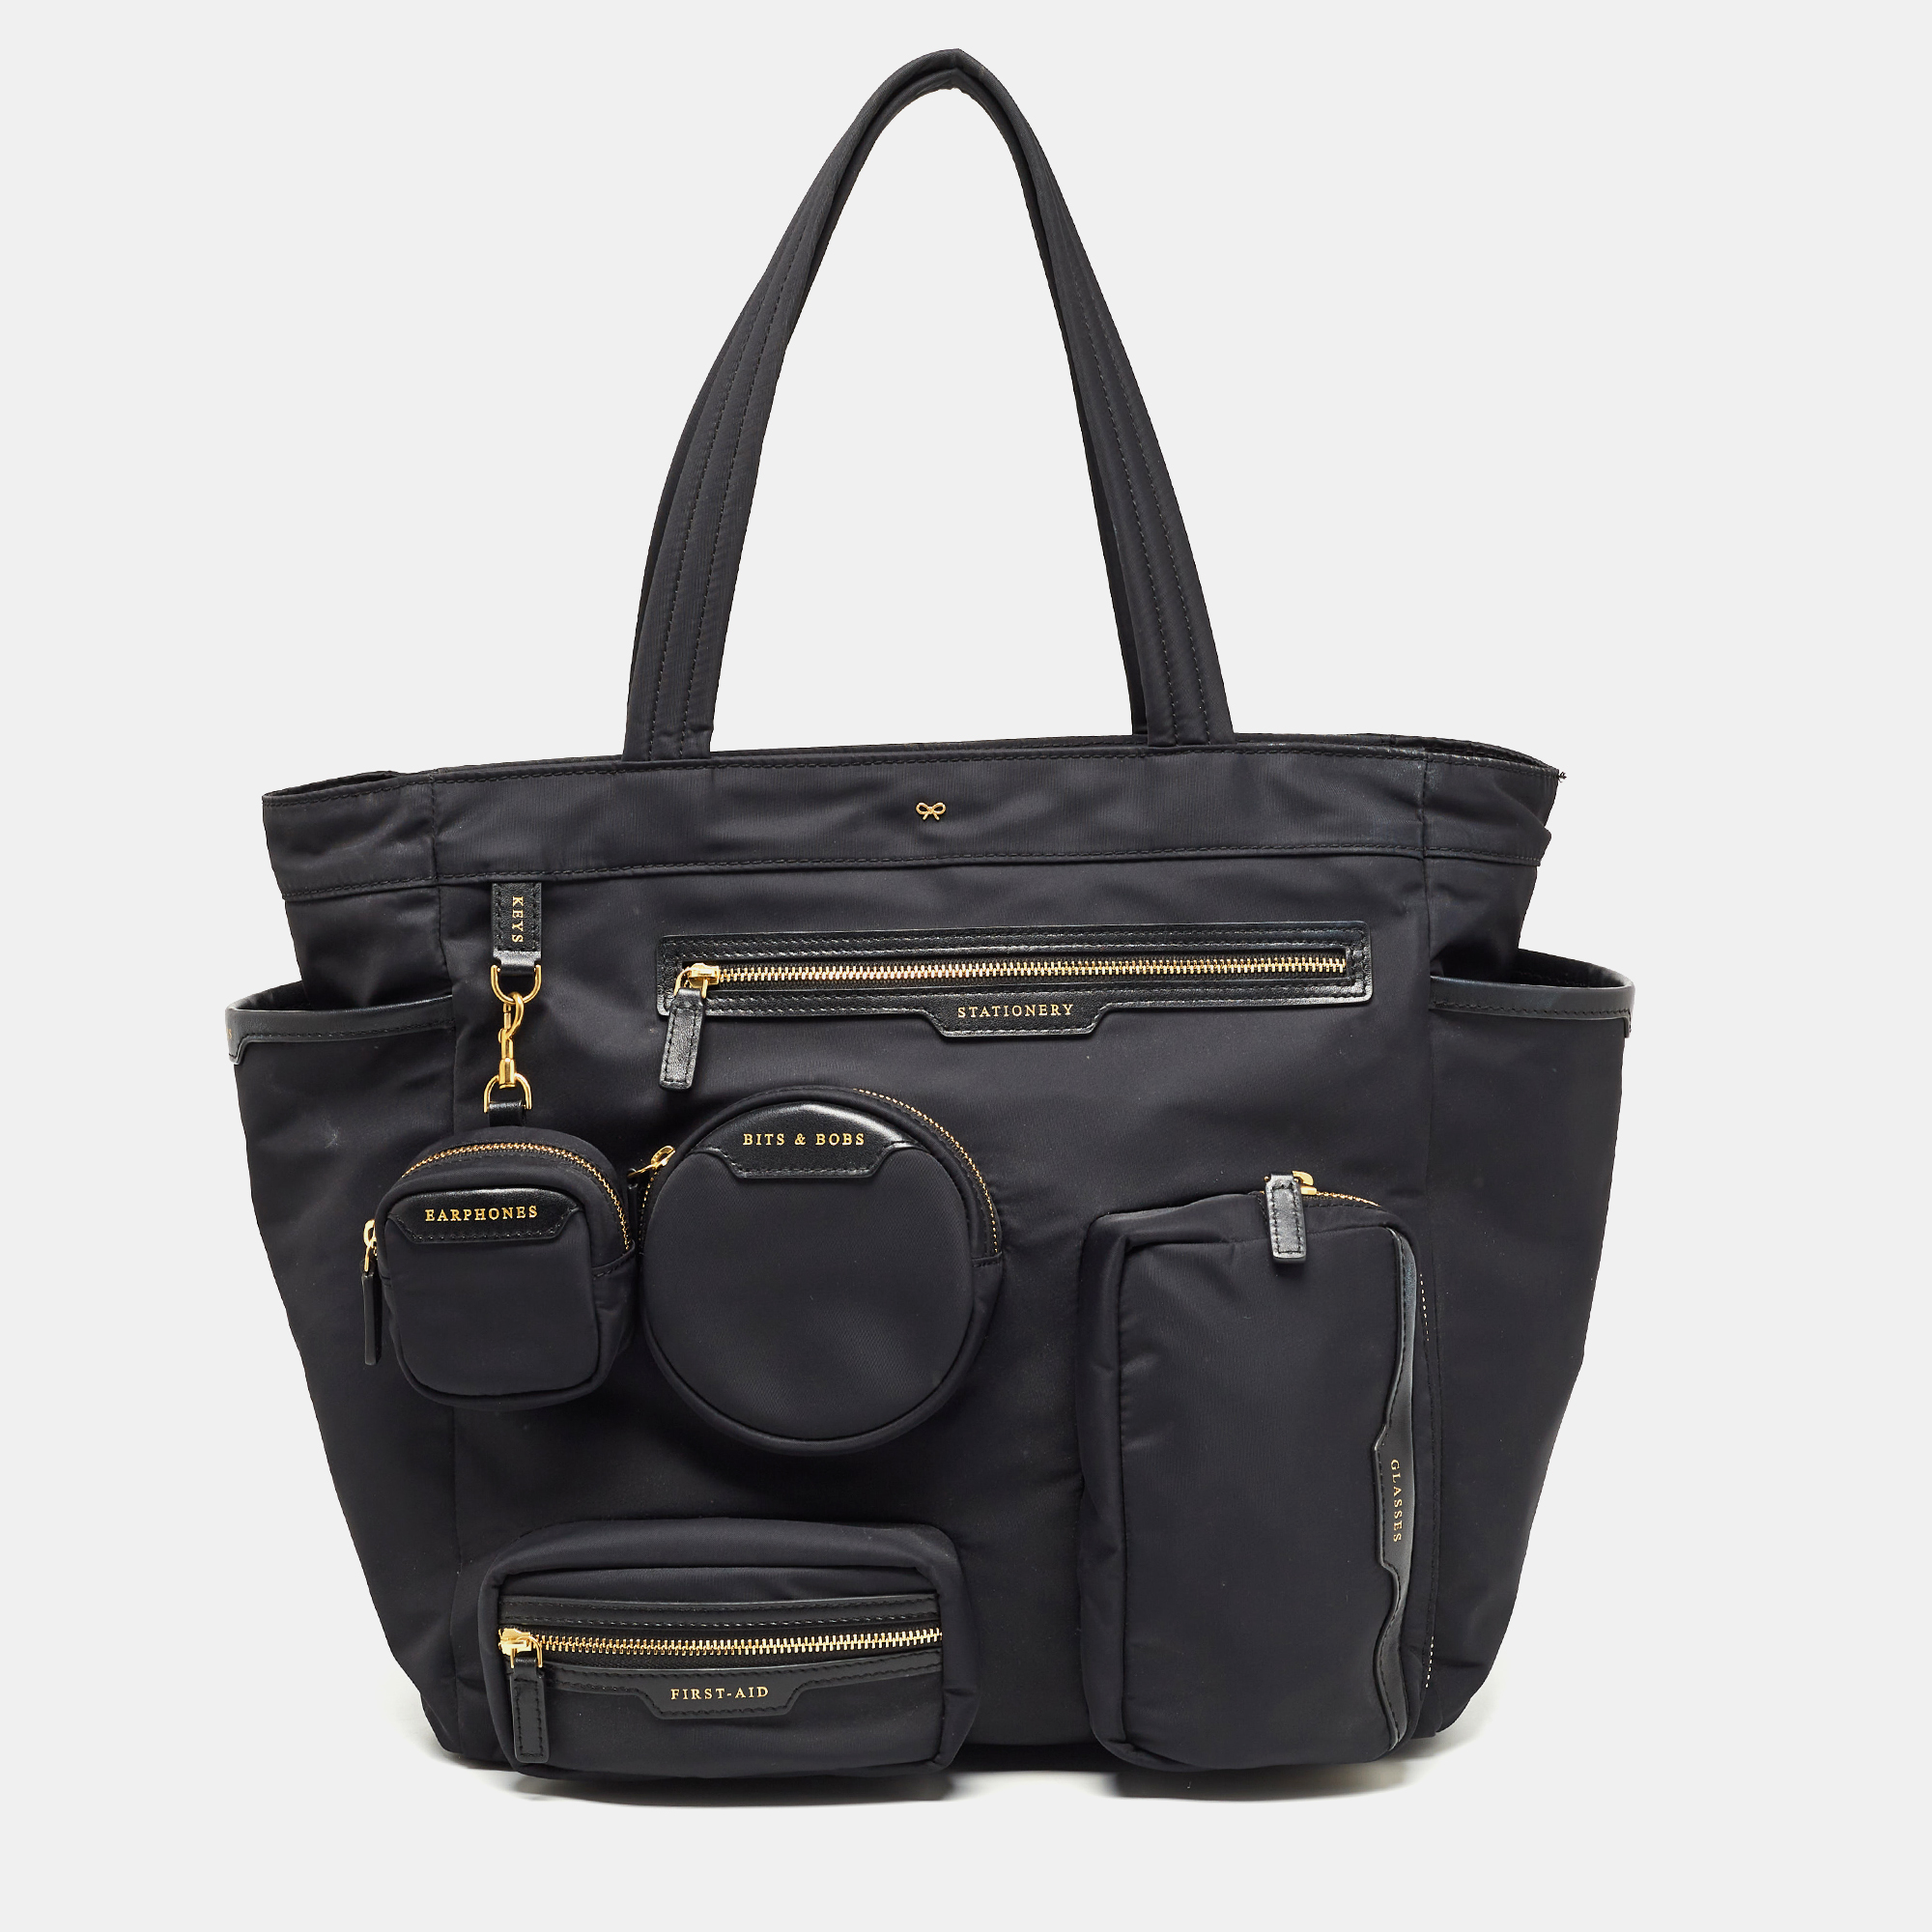 Anya Hindmarch Black Nylon And Leather Commuter Tote